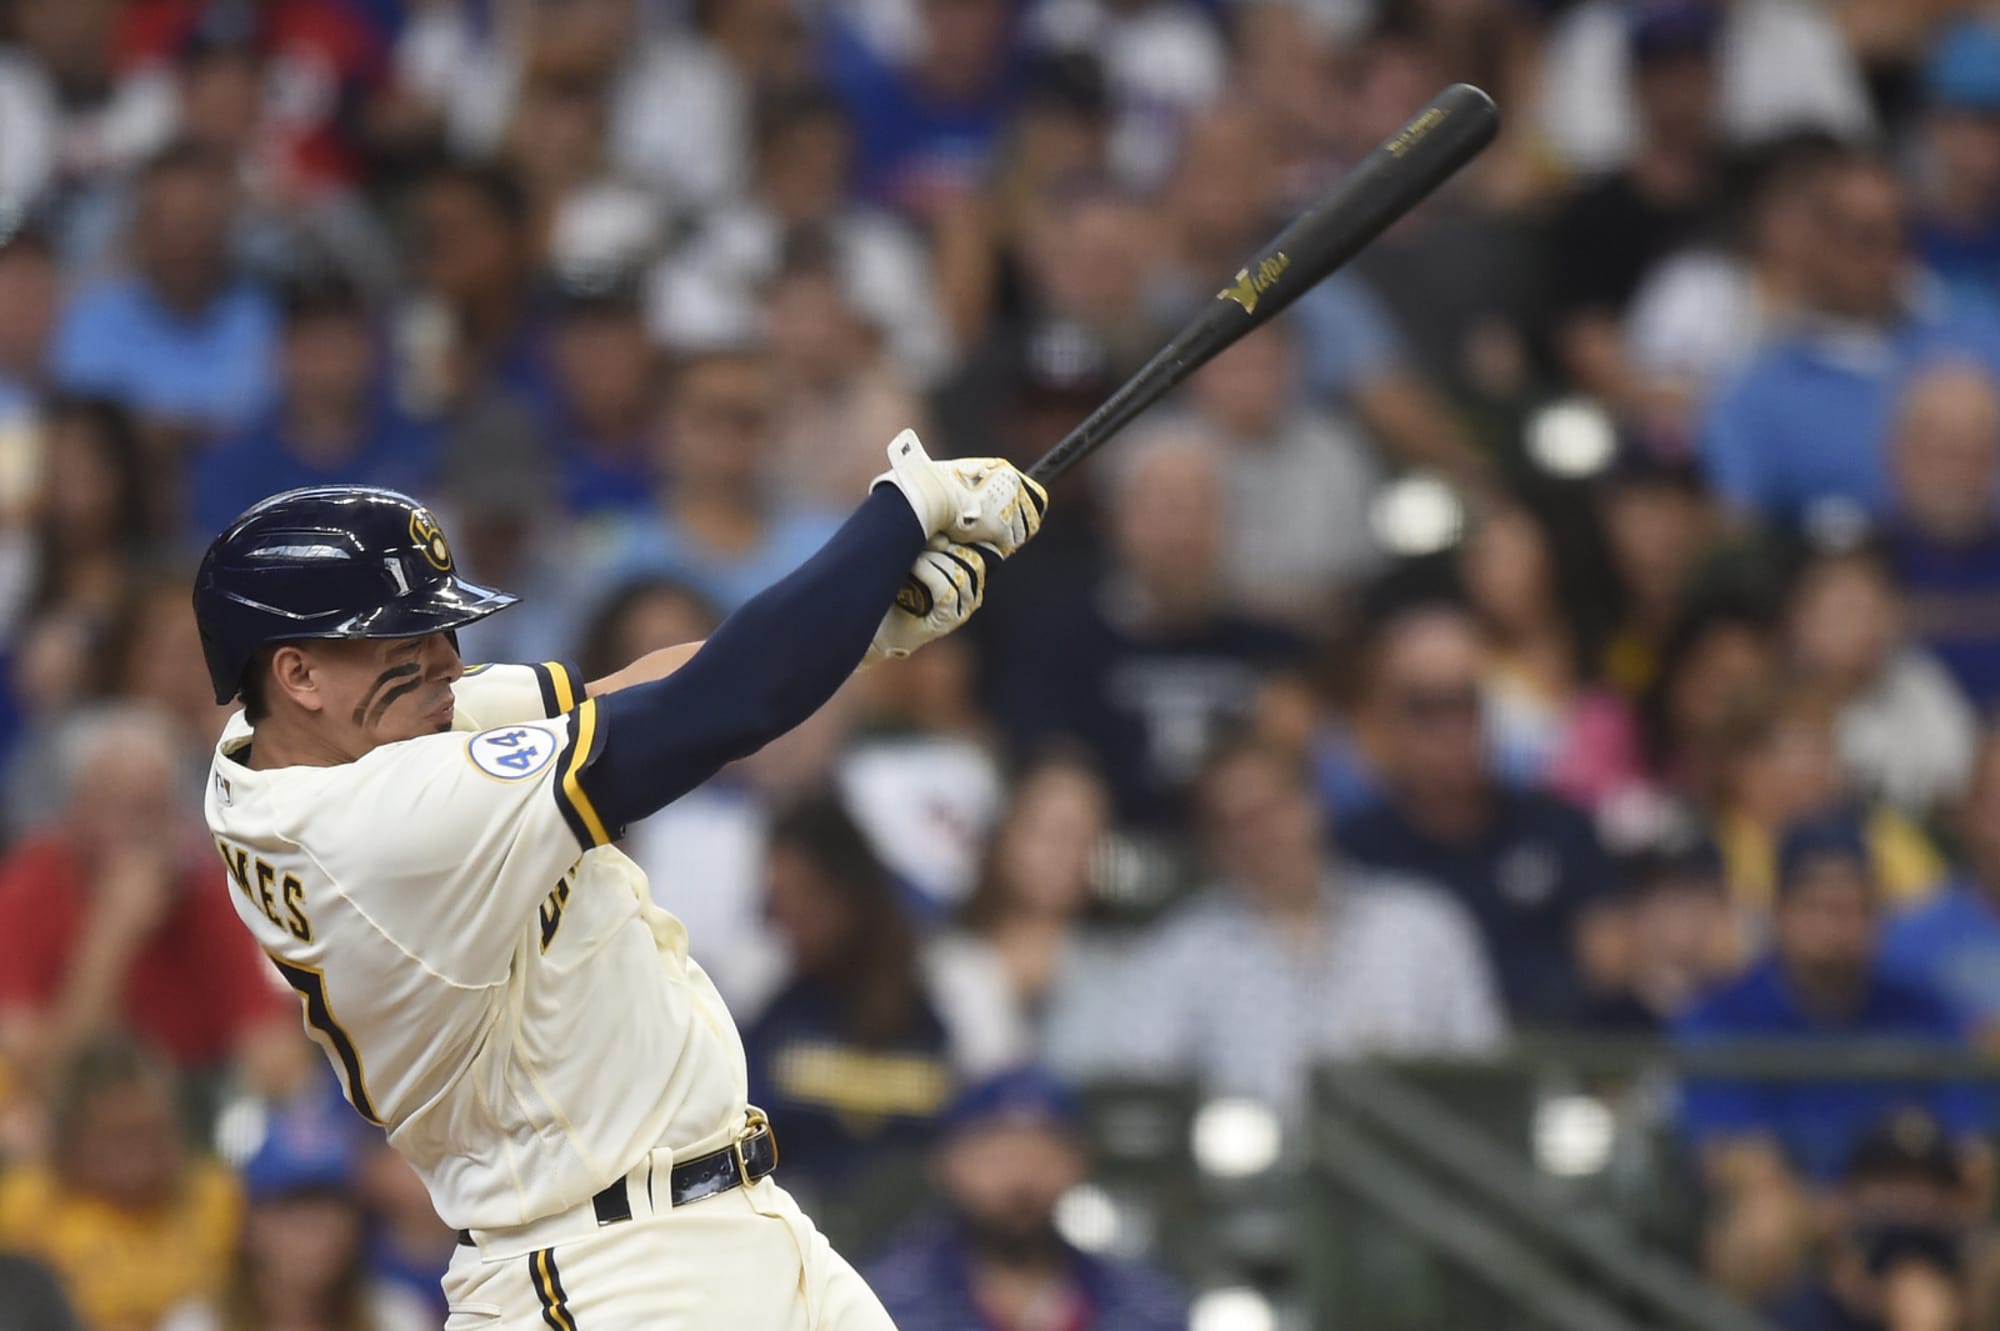 Milwaukee Brewers activate Willy Adames from Injured List - Brew Crew Ball